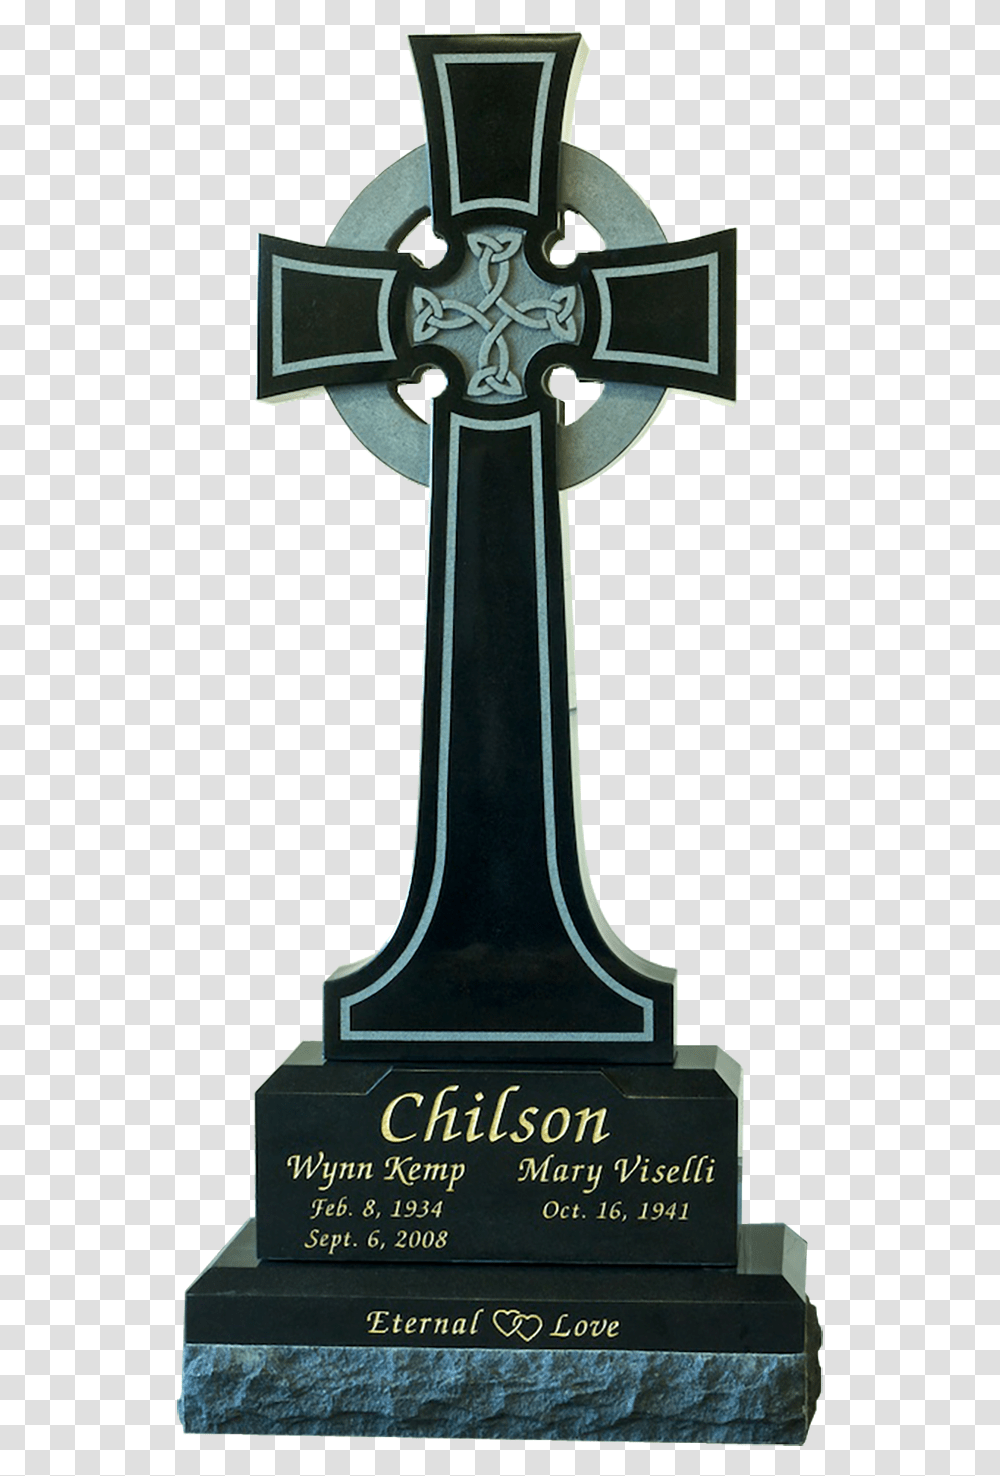 High Monument Co Chilsoncrosspng Memorial, Logo, Crucifix, Tomb Transparent Png